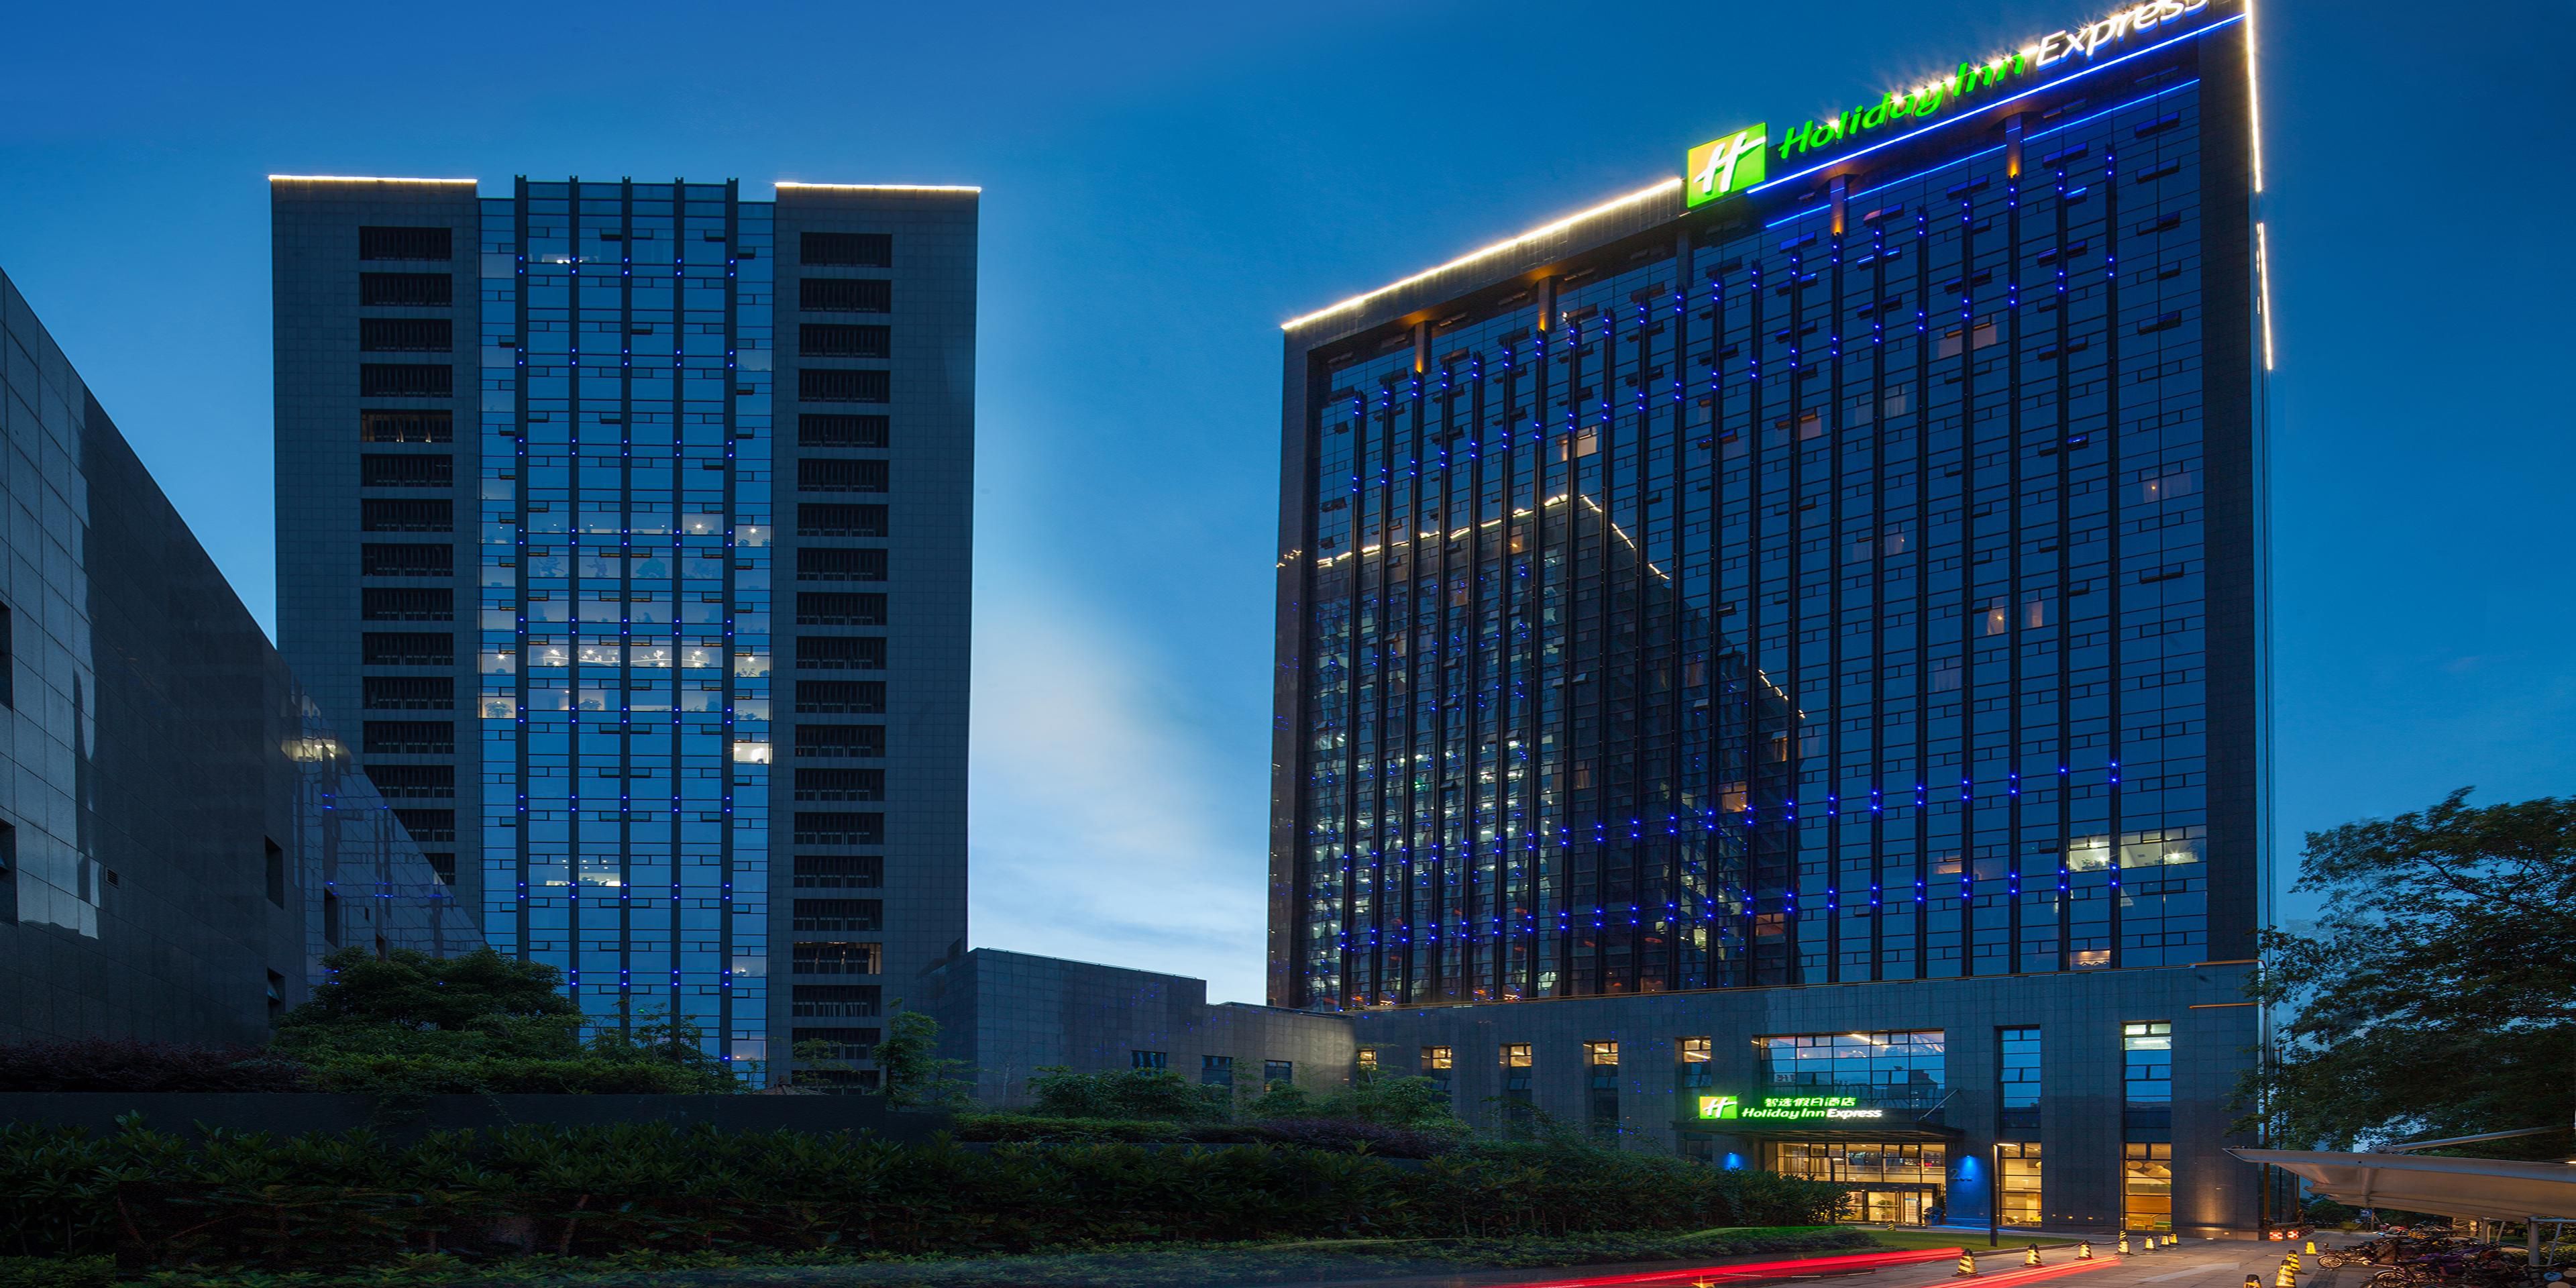 hotel is located on Xueyuan Road in  Xihu District, where the transportation is convenient. It is 7.8km from Hangzhou Railway Station and 37km from Hangzhou Xiaoshan International Airport. The Hotel is located near Westlake, the surrounding attractions are West Lake Scenic Area, Xixi Wetland Park and Huanglong Sports Center. 